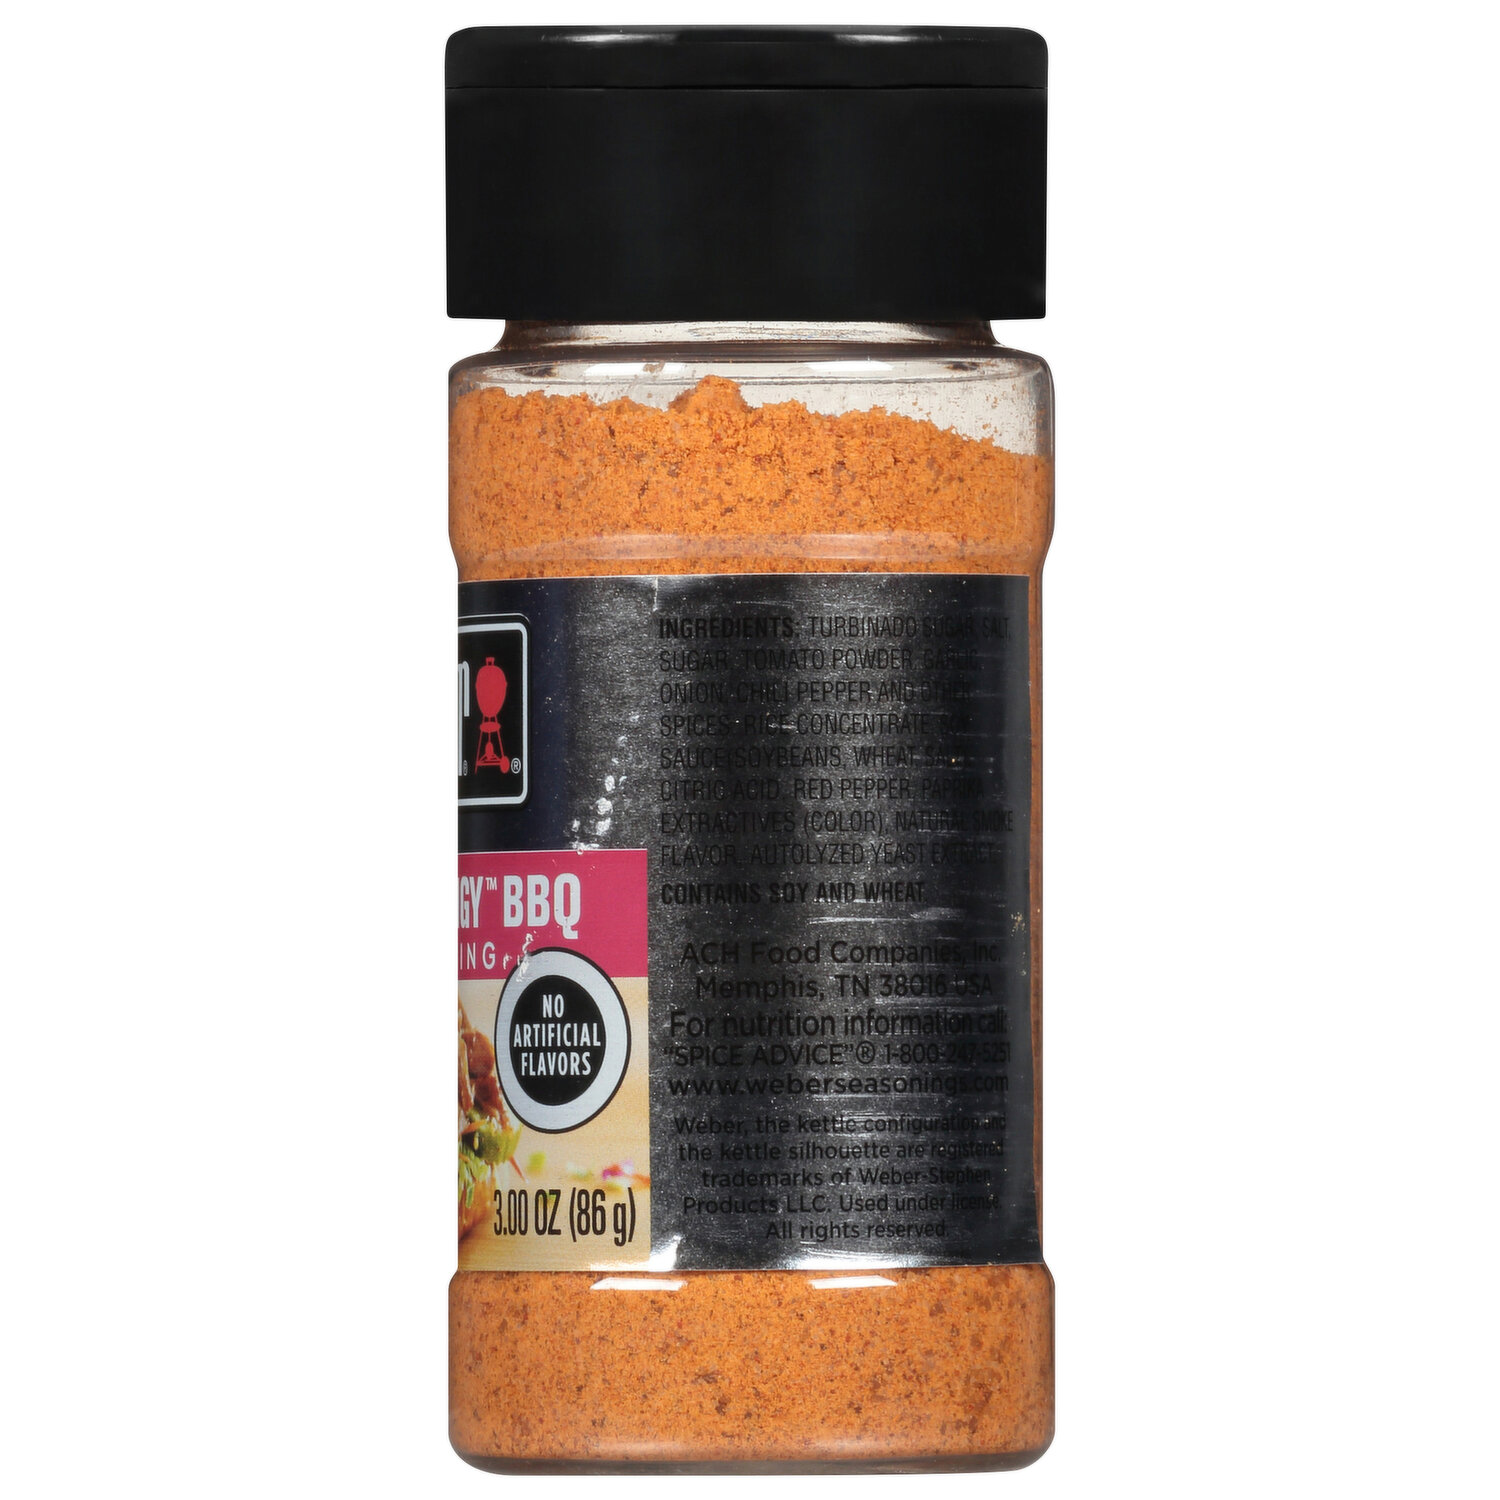 Famous Dave's Country Roast Chicken Seasoning 5.25 oz., 2 Pack